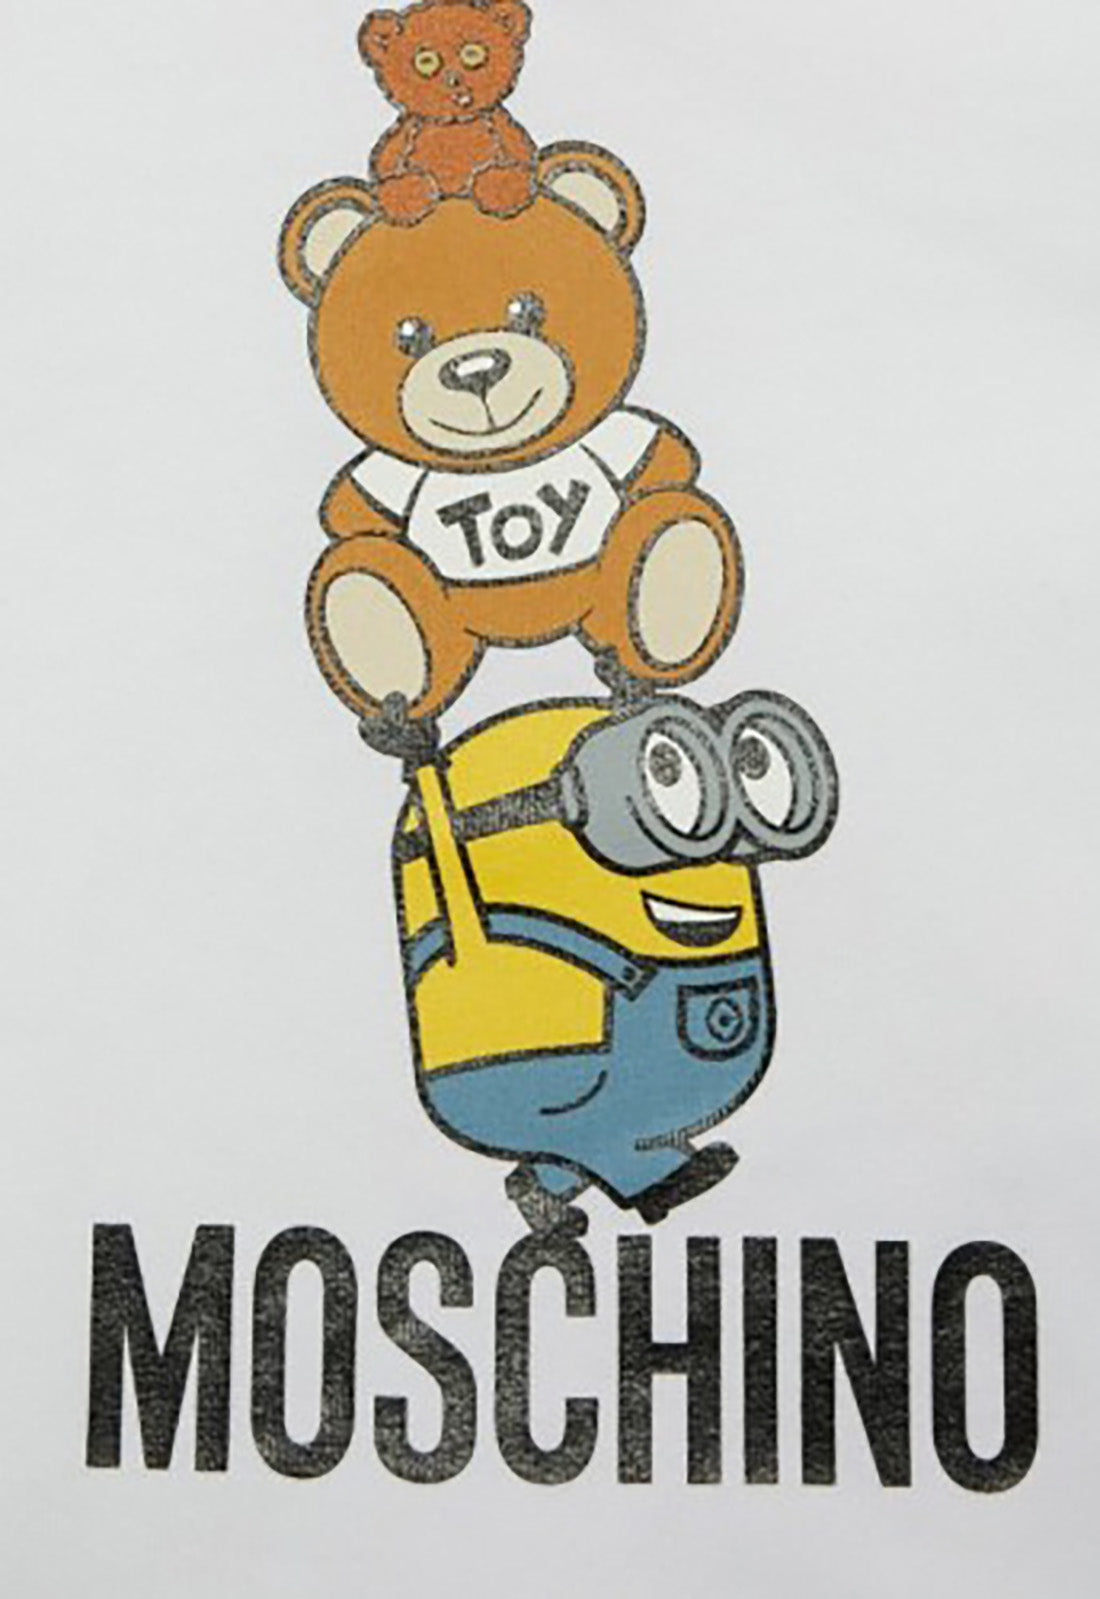 MOSCHINO KIDS SPORTS OUTFIT